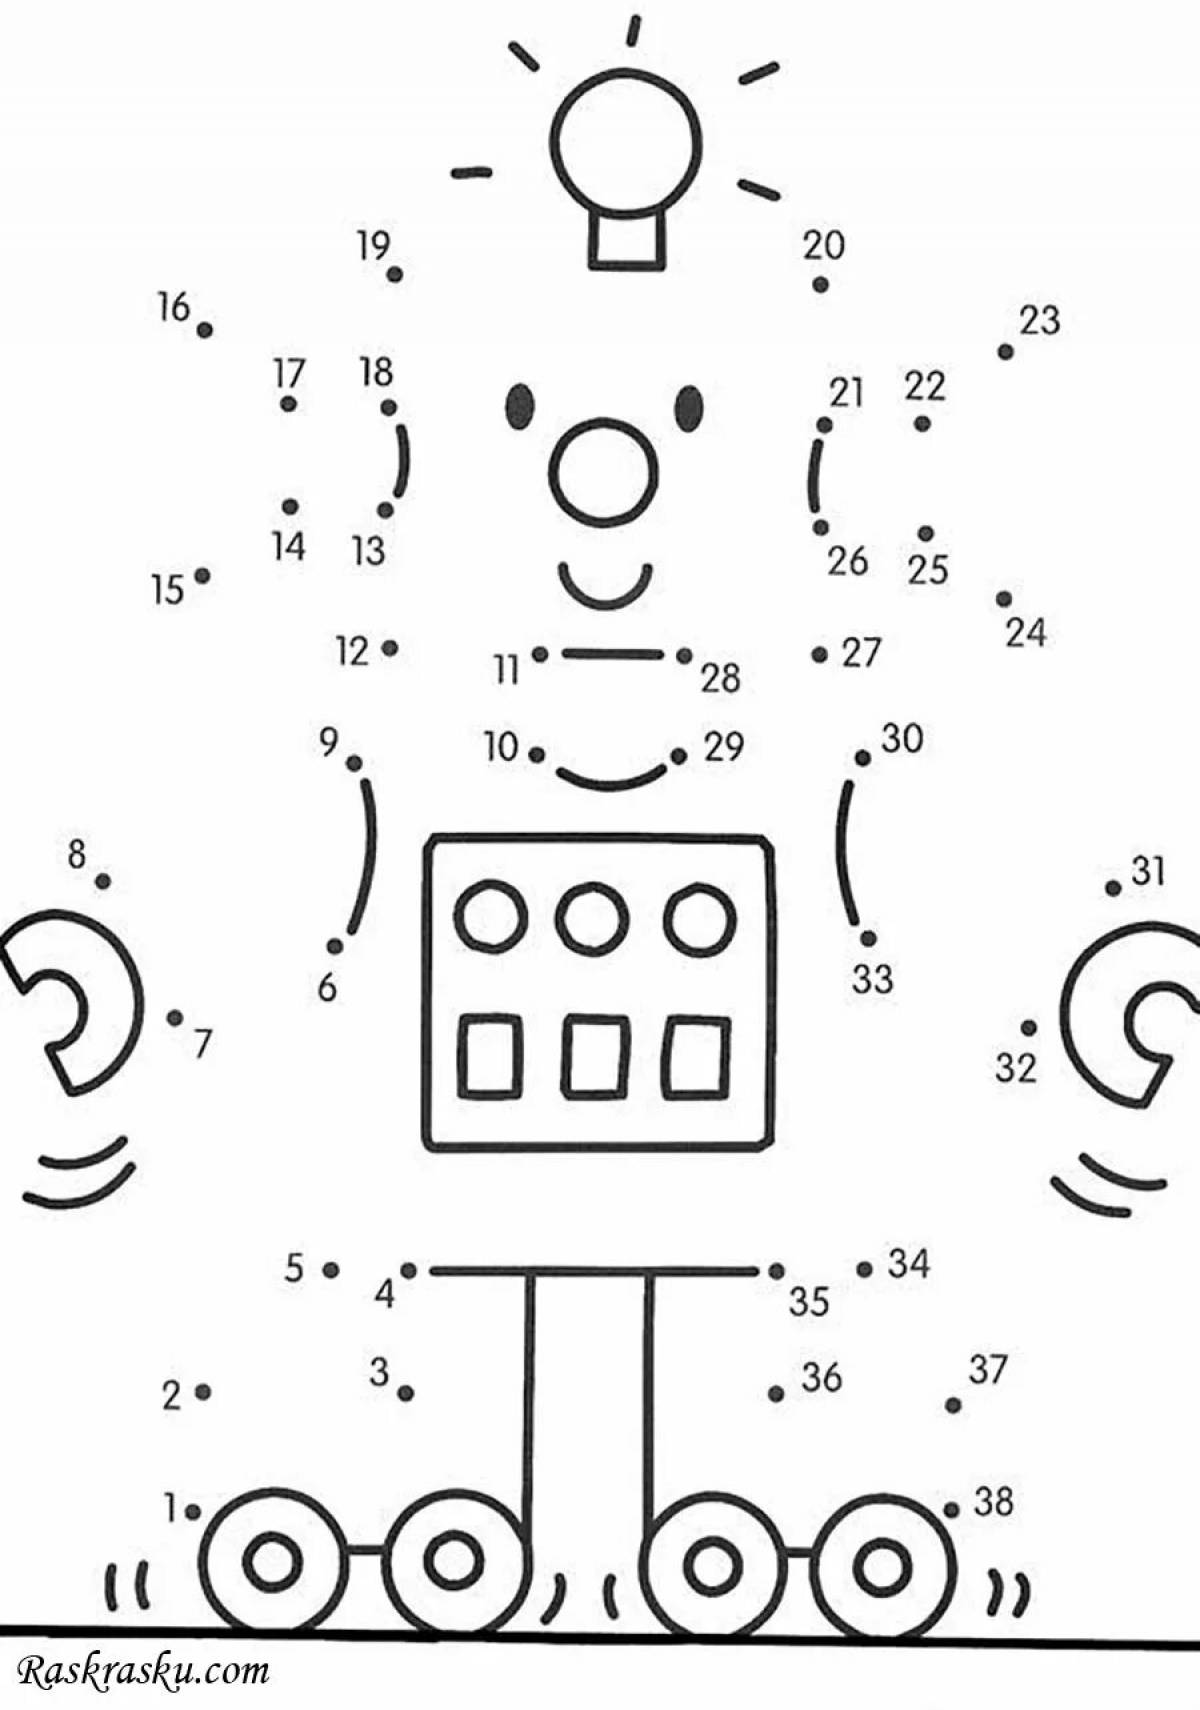 Robot by numbers #26